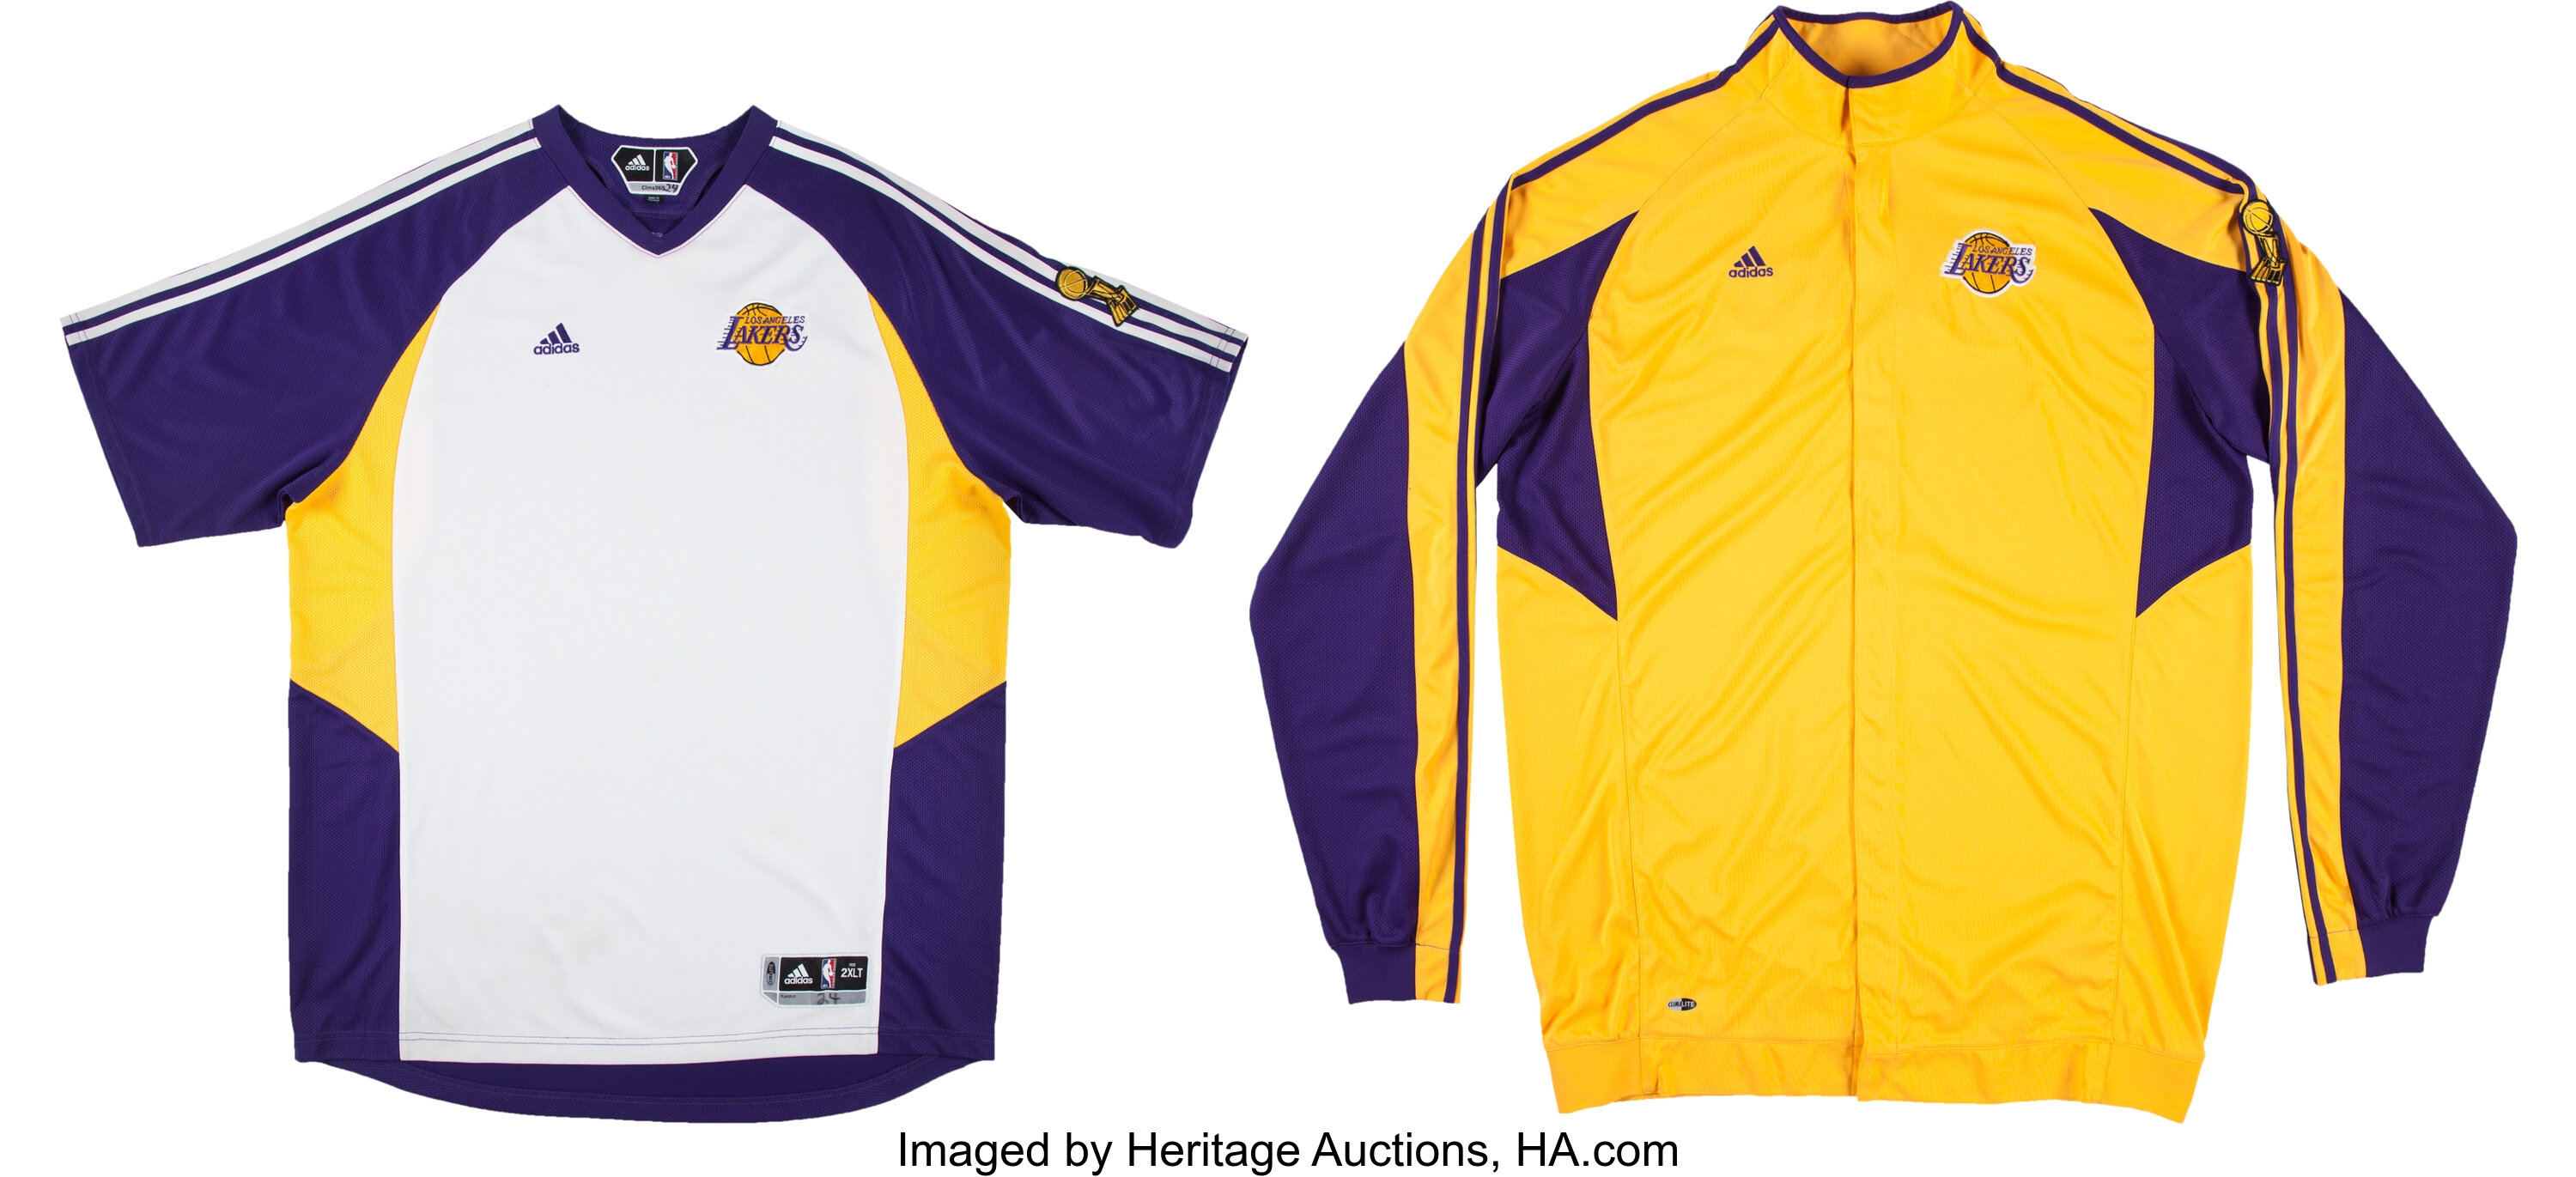 Lot Detail - Los Angeles Lakers Long Sleeve Warm-Up Shooting Shirt  Attributed to Kobe Bryant (Grey Flannel)